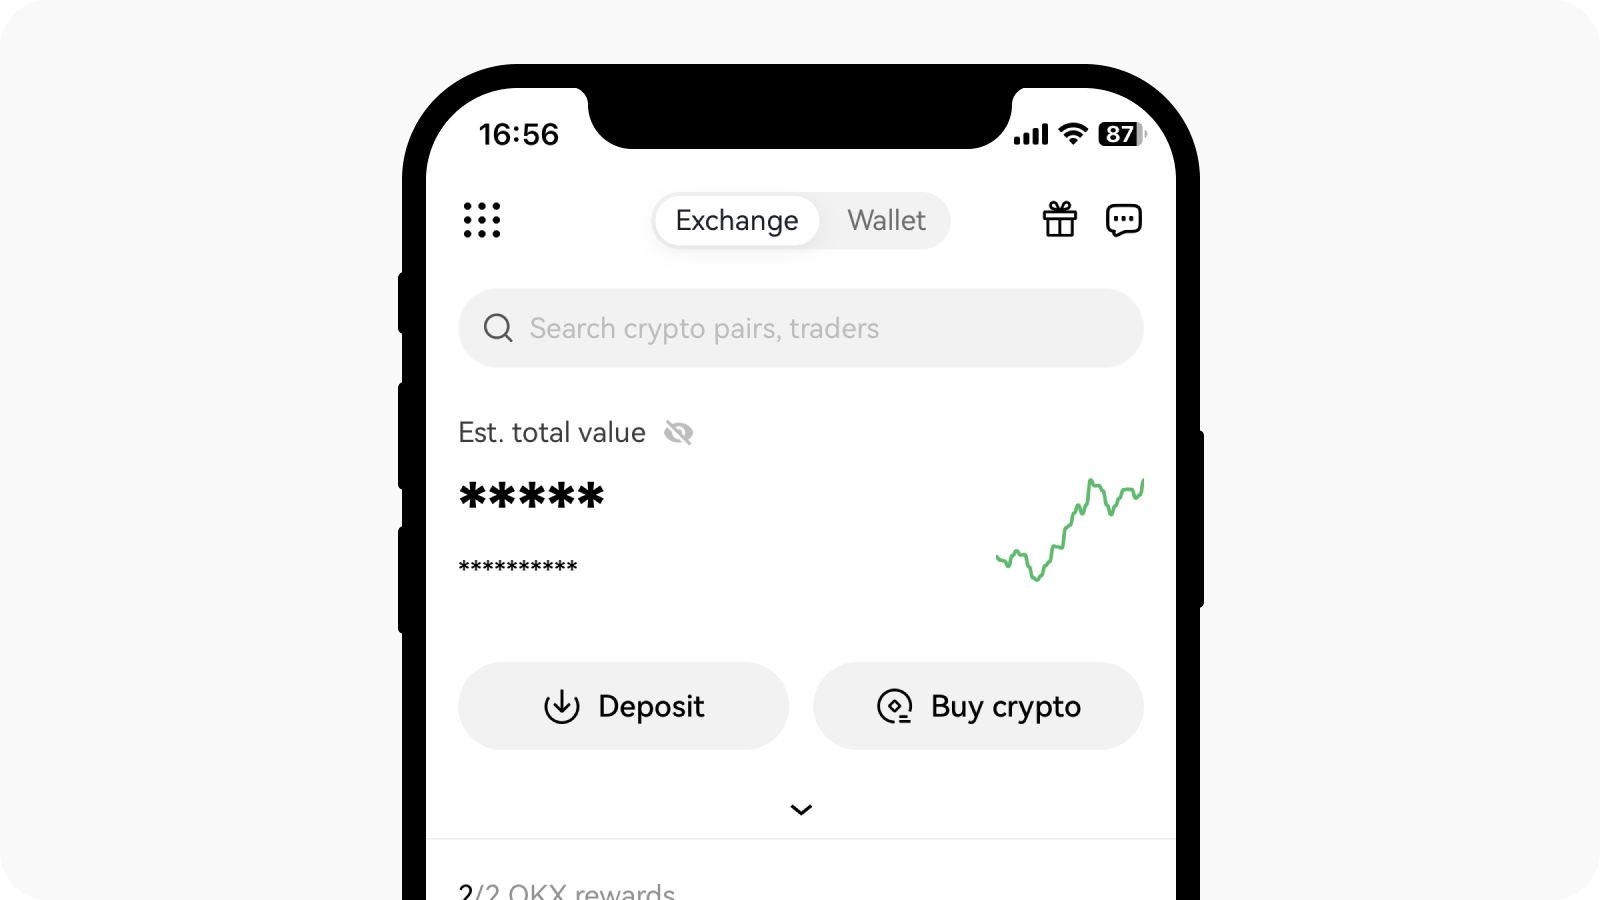 Binance Deposit Methods: Step-by-Step Guide to Buy Crypto via Fiat, Bank Card, and P2P